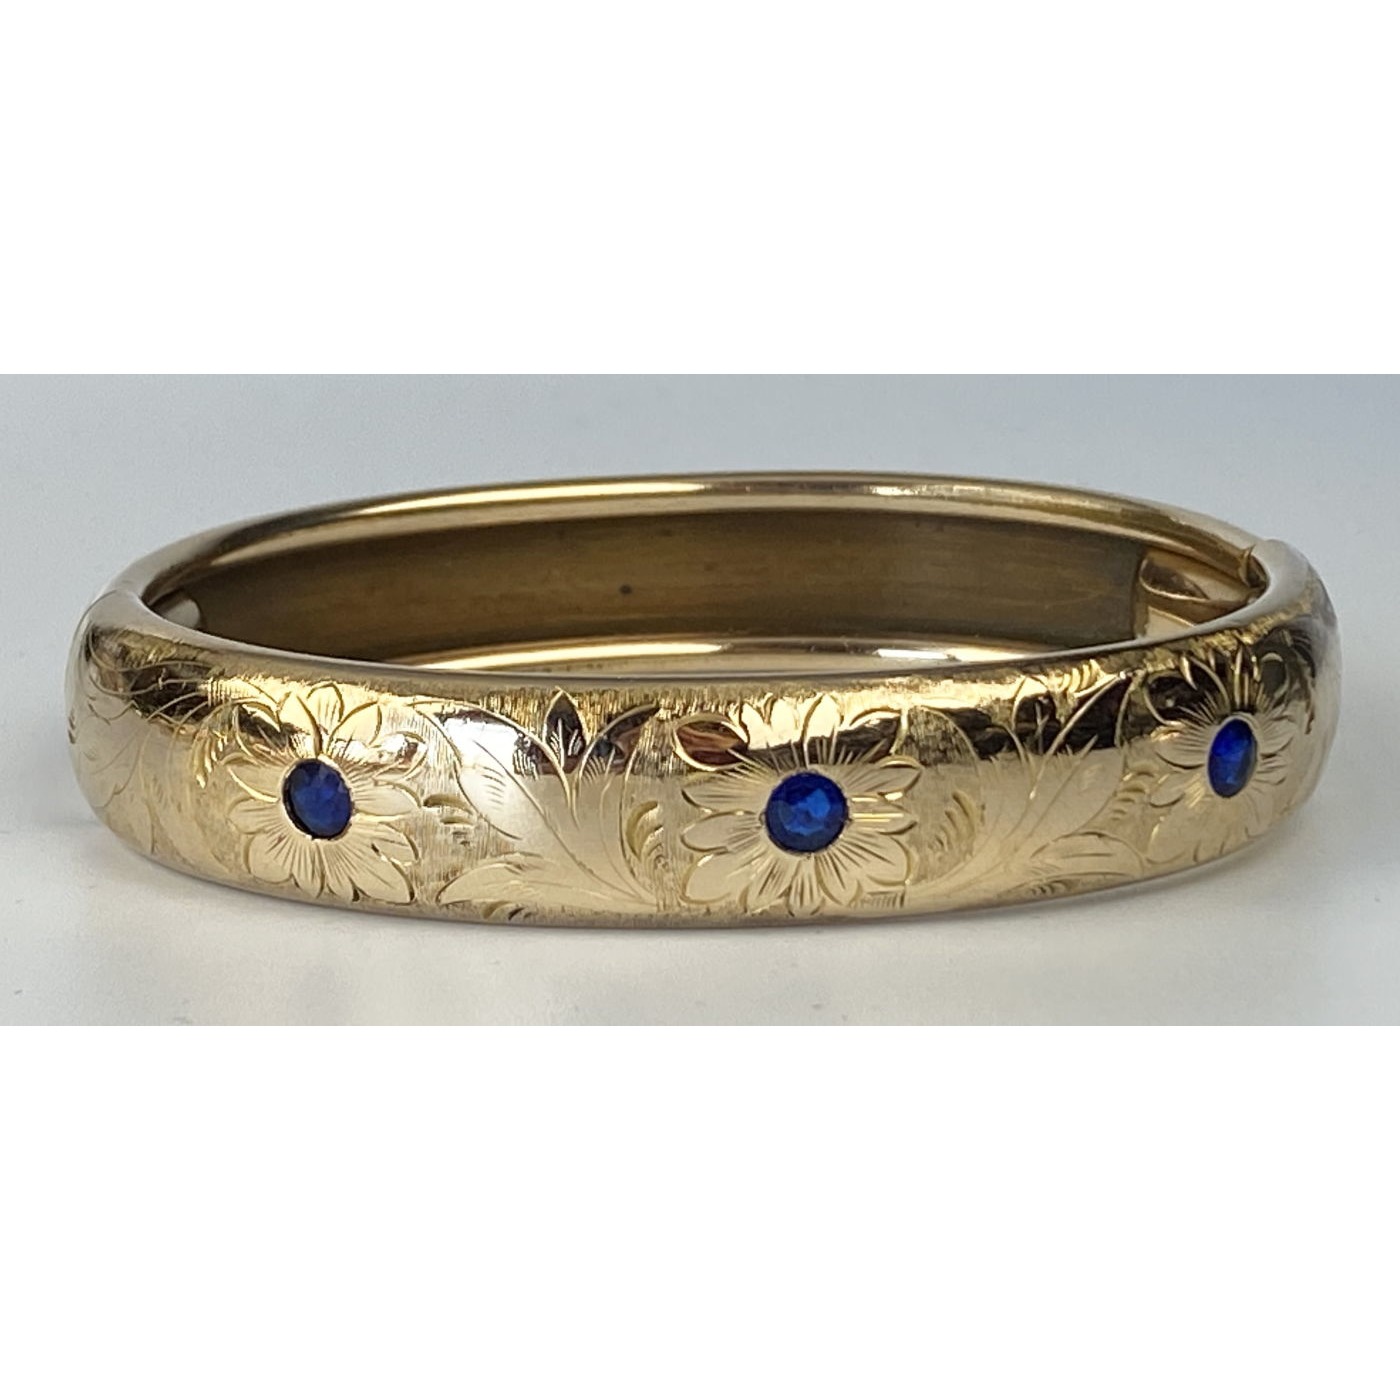 Brilliant Blue Stones and Floral Engraved Engagement Bangle